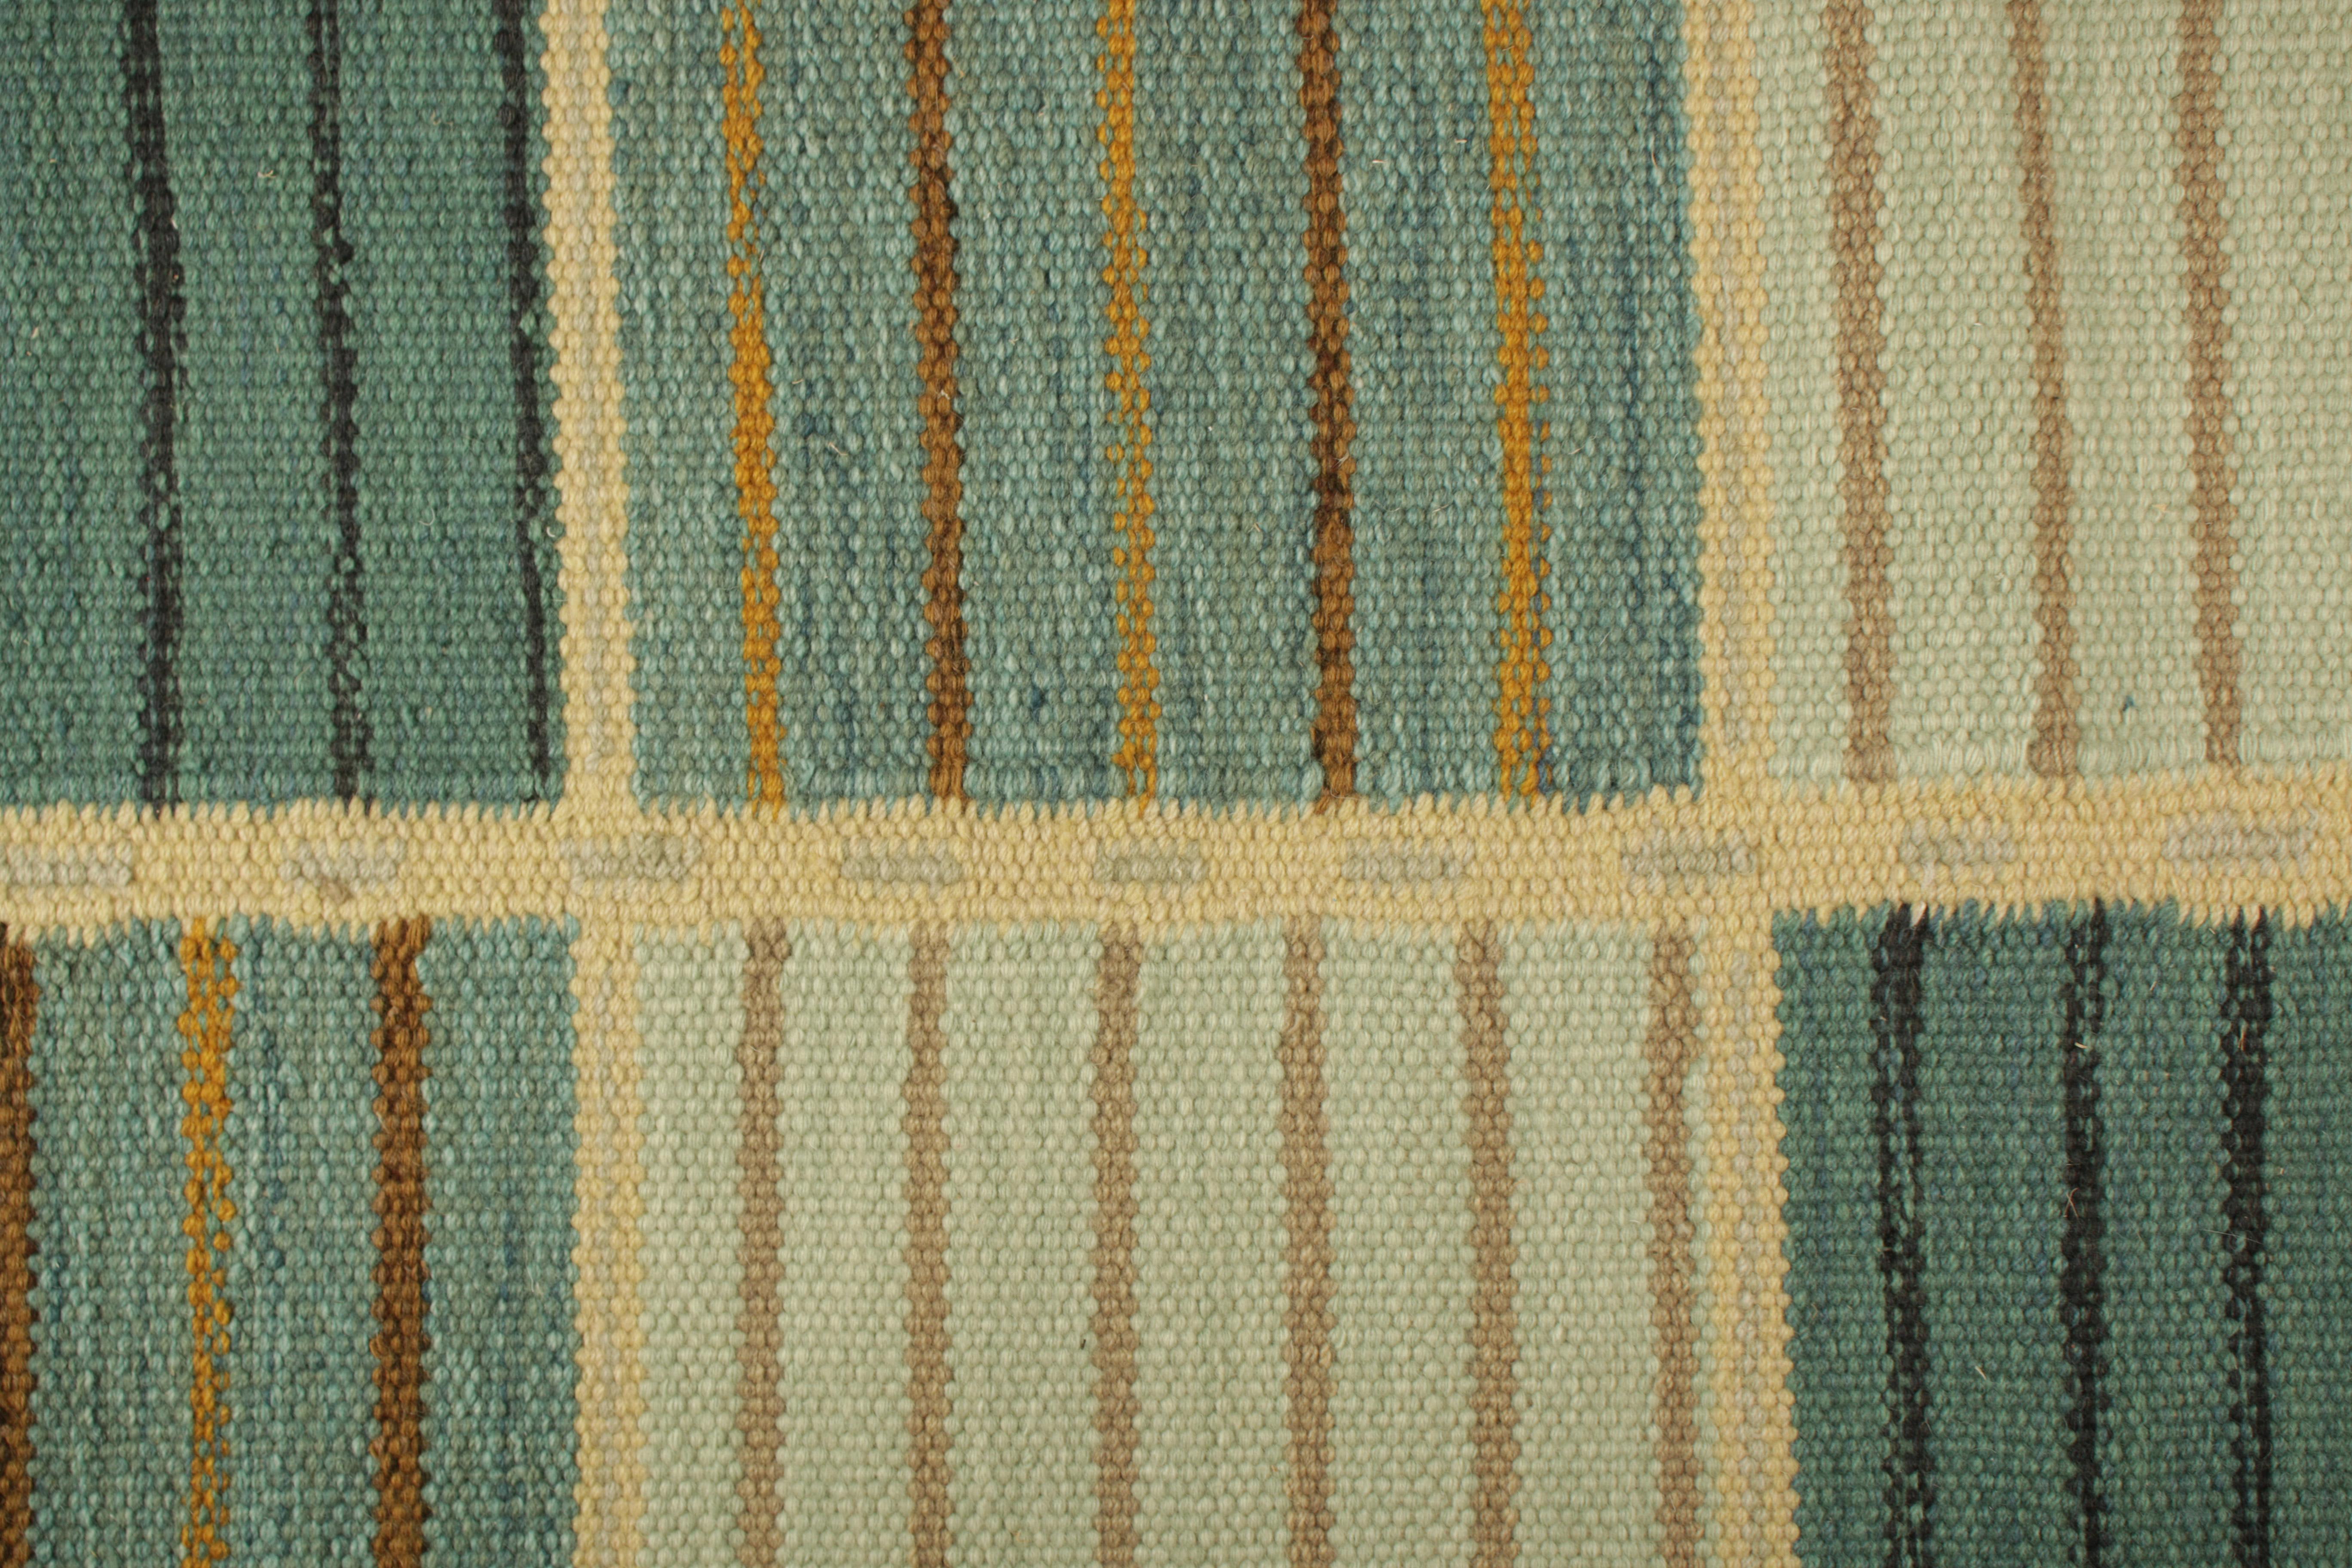 From an exciting new collection of gift-size pieces, this 3x6 Swedish runner is a bold new addition to the Scandinavian Collection by Rug & Kilim. Handwoven in a wool flatweave with undyed natural yarns as well, its design is inspired by Swedish